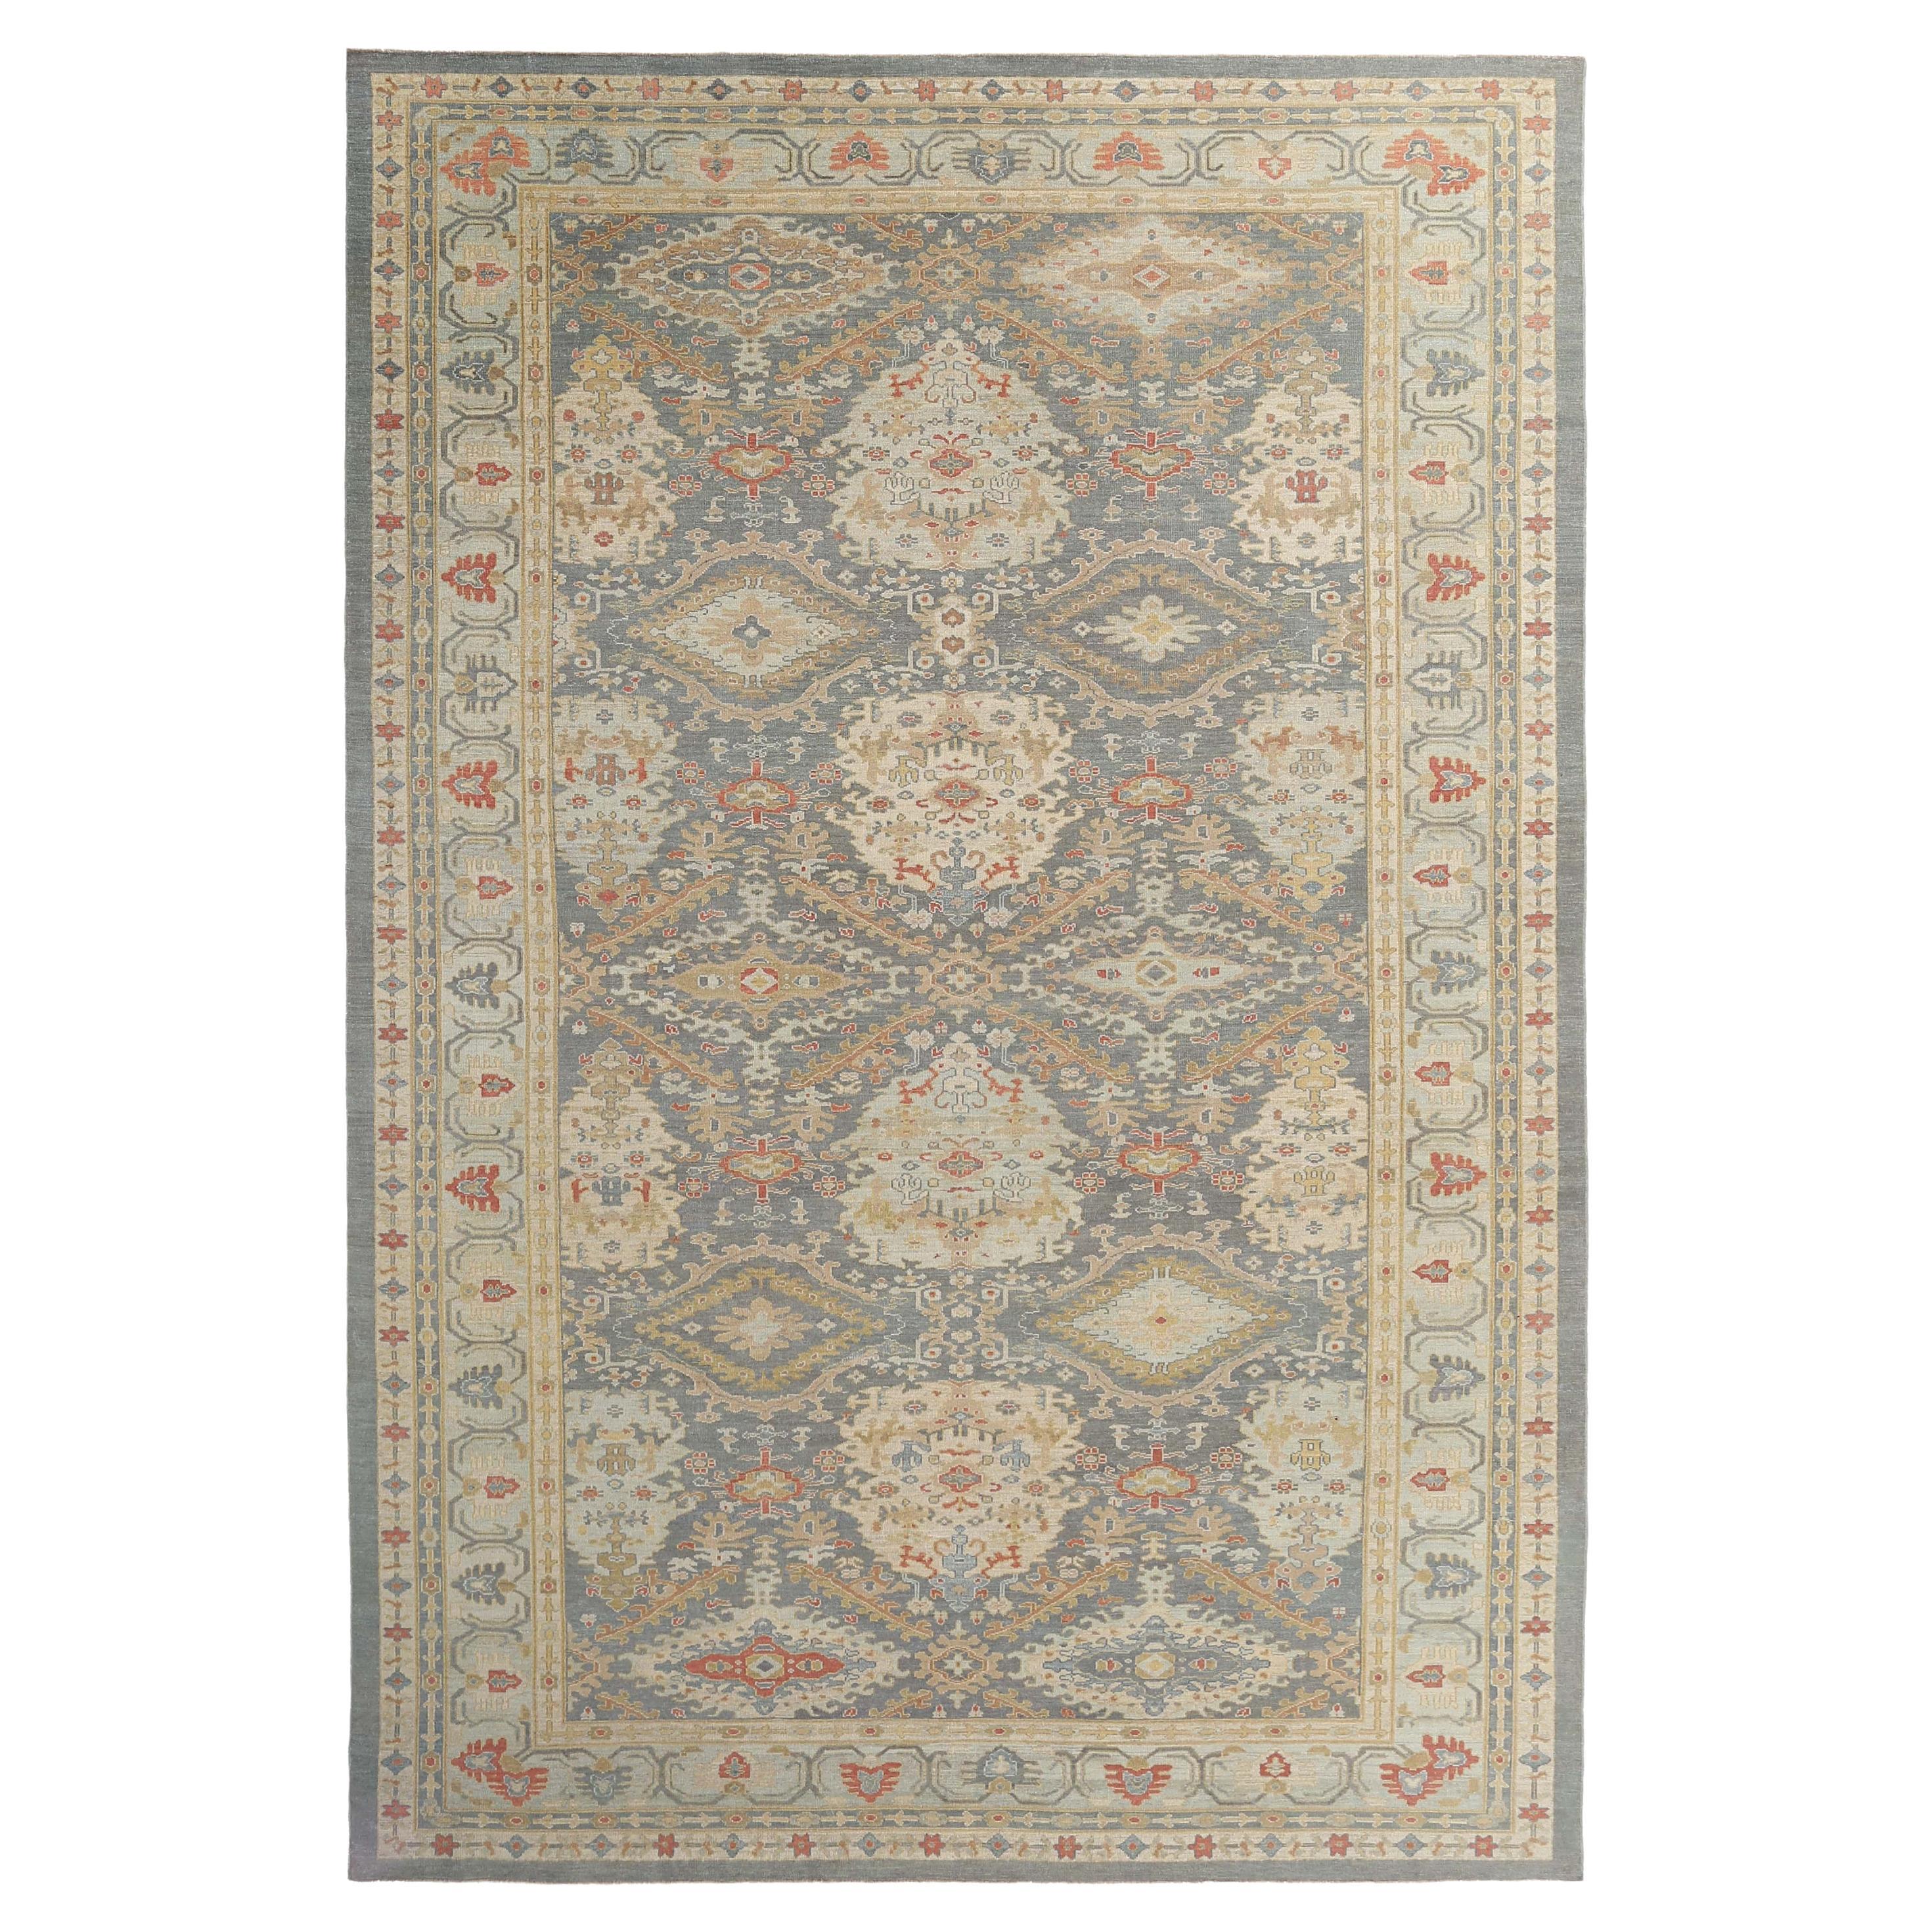 Handmade Turkish Sultanabad Rug in Blue, Red, and Yellow For Sale